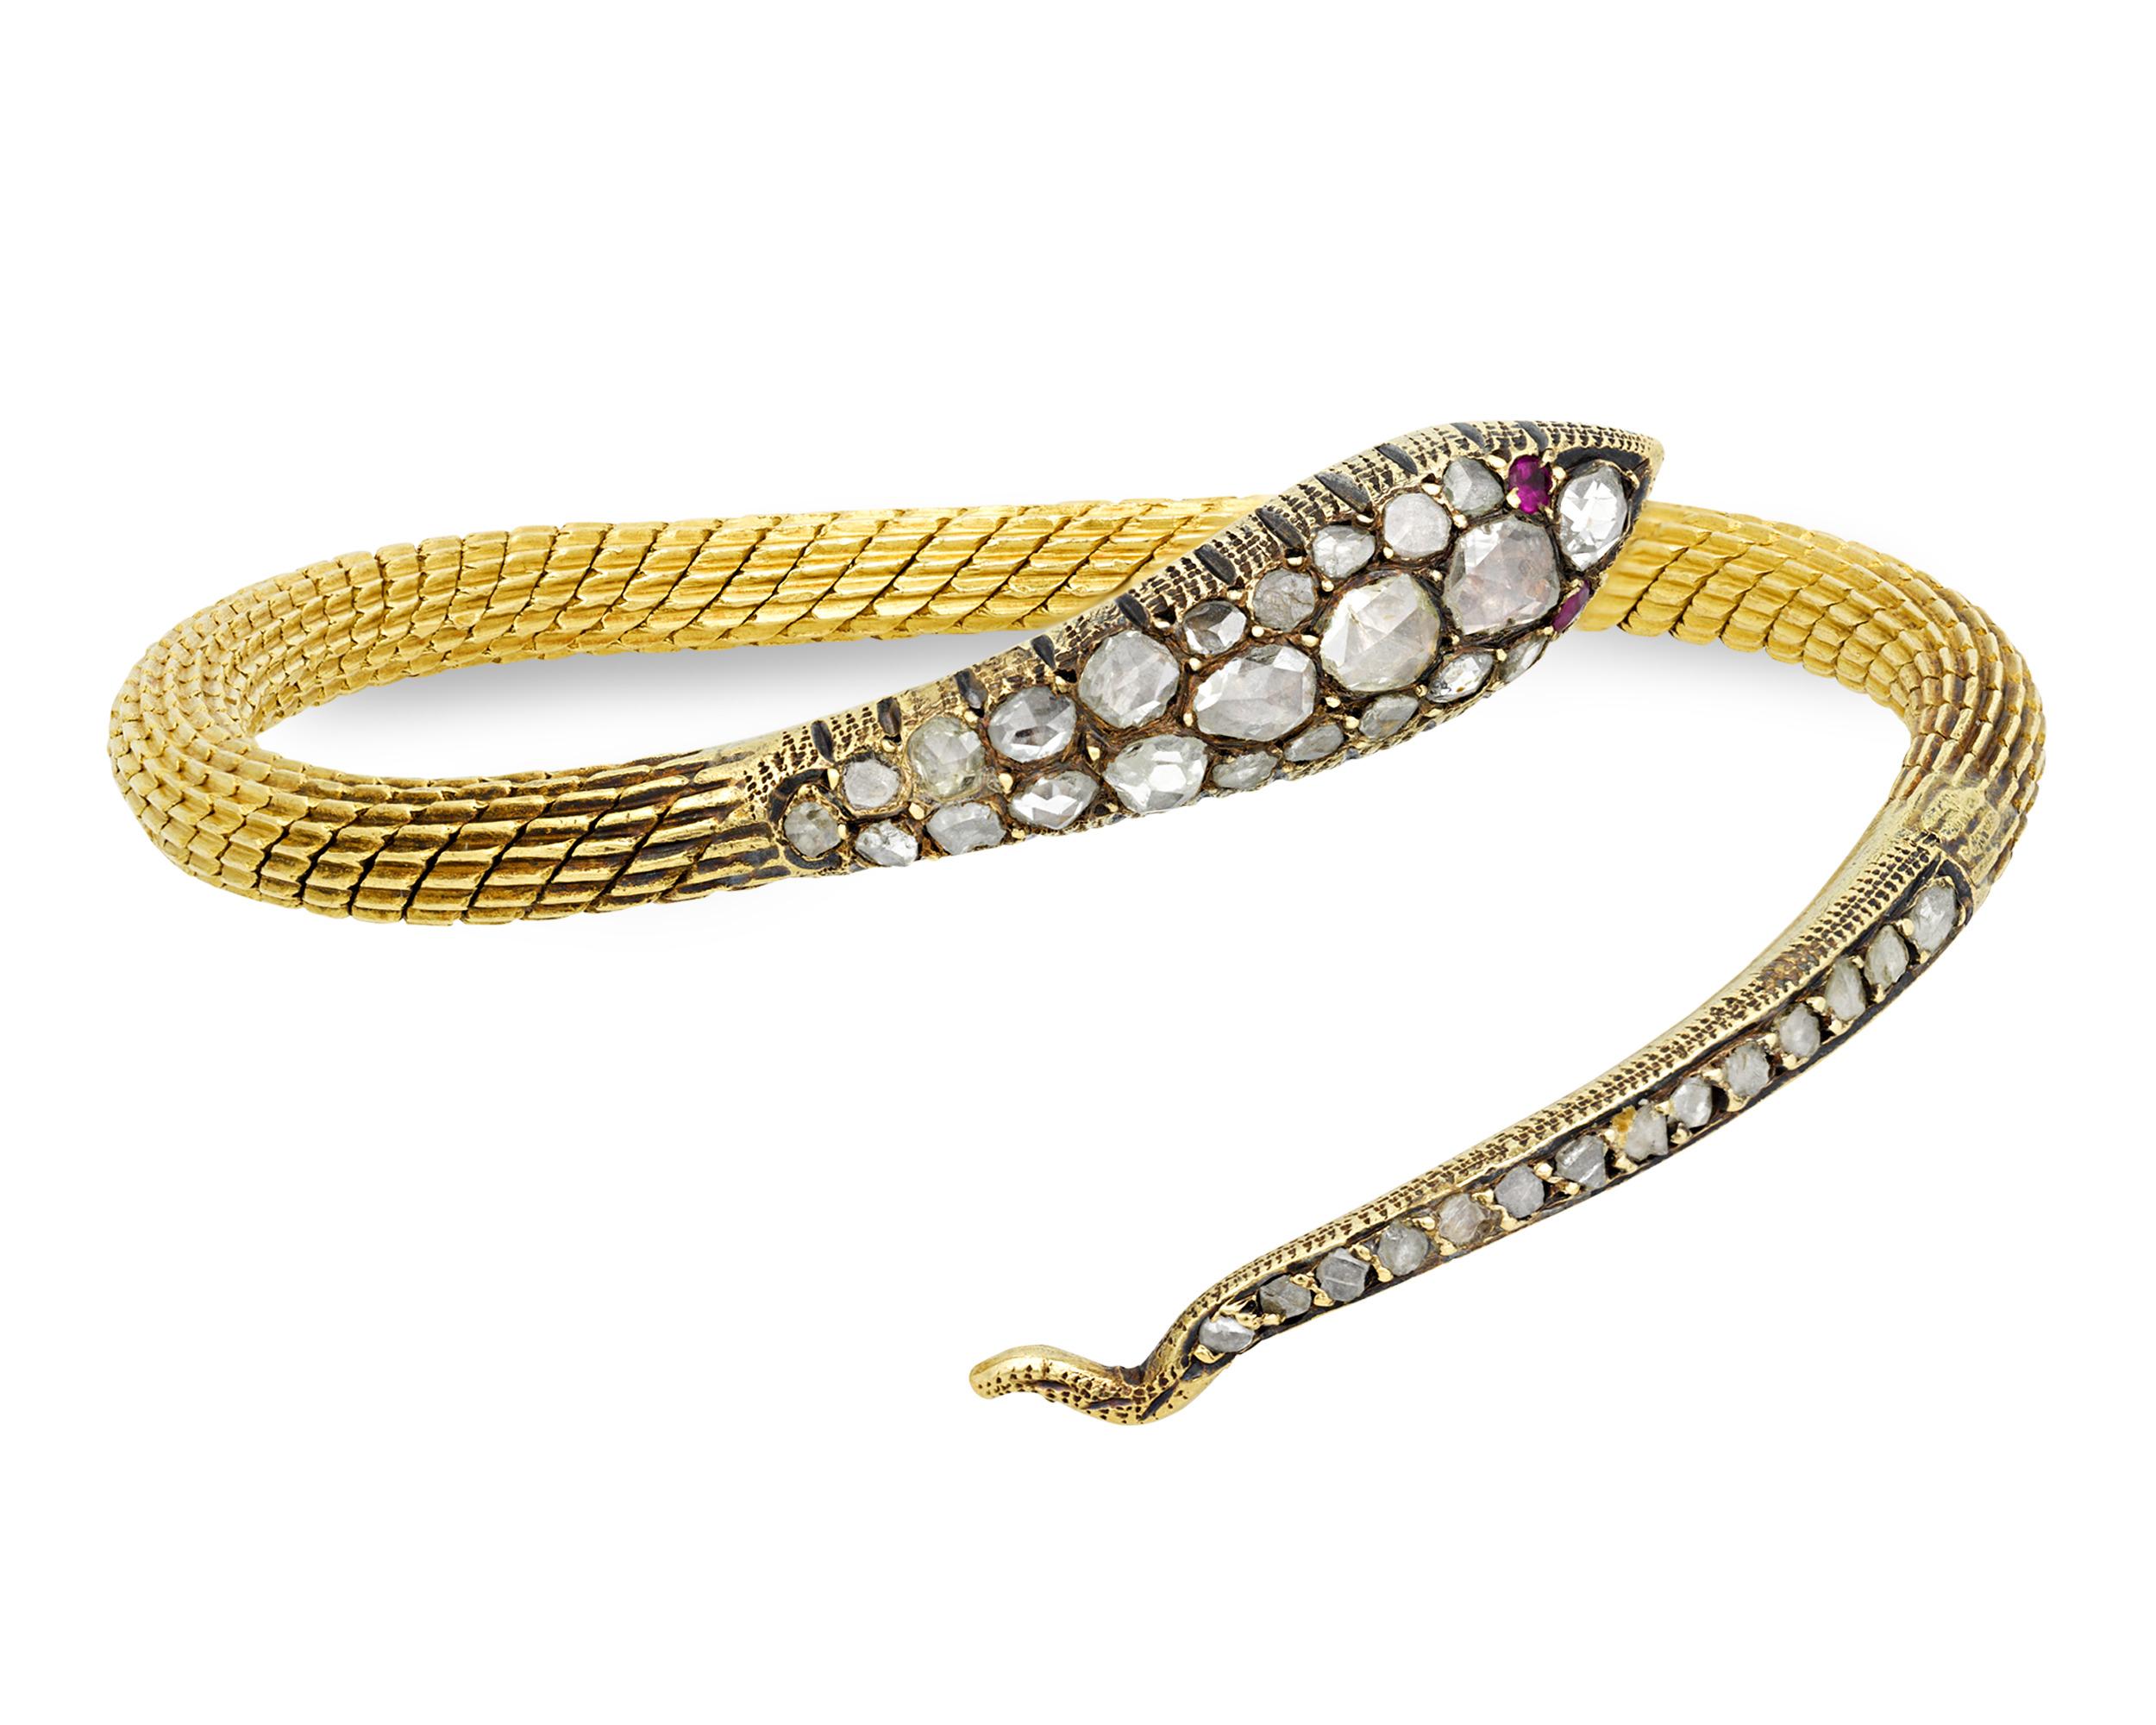 This eye-catching 18K yellow gold bangle bracelet takes the form of a slithering snake studded with diamond scales and brought to life with ruby eyes. Serpents became highly fashionable in jewelry design beginning in the mid-19th century, appearing